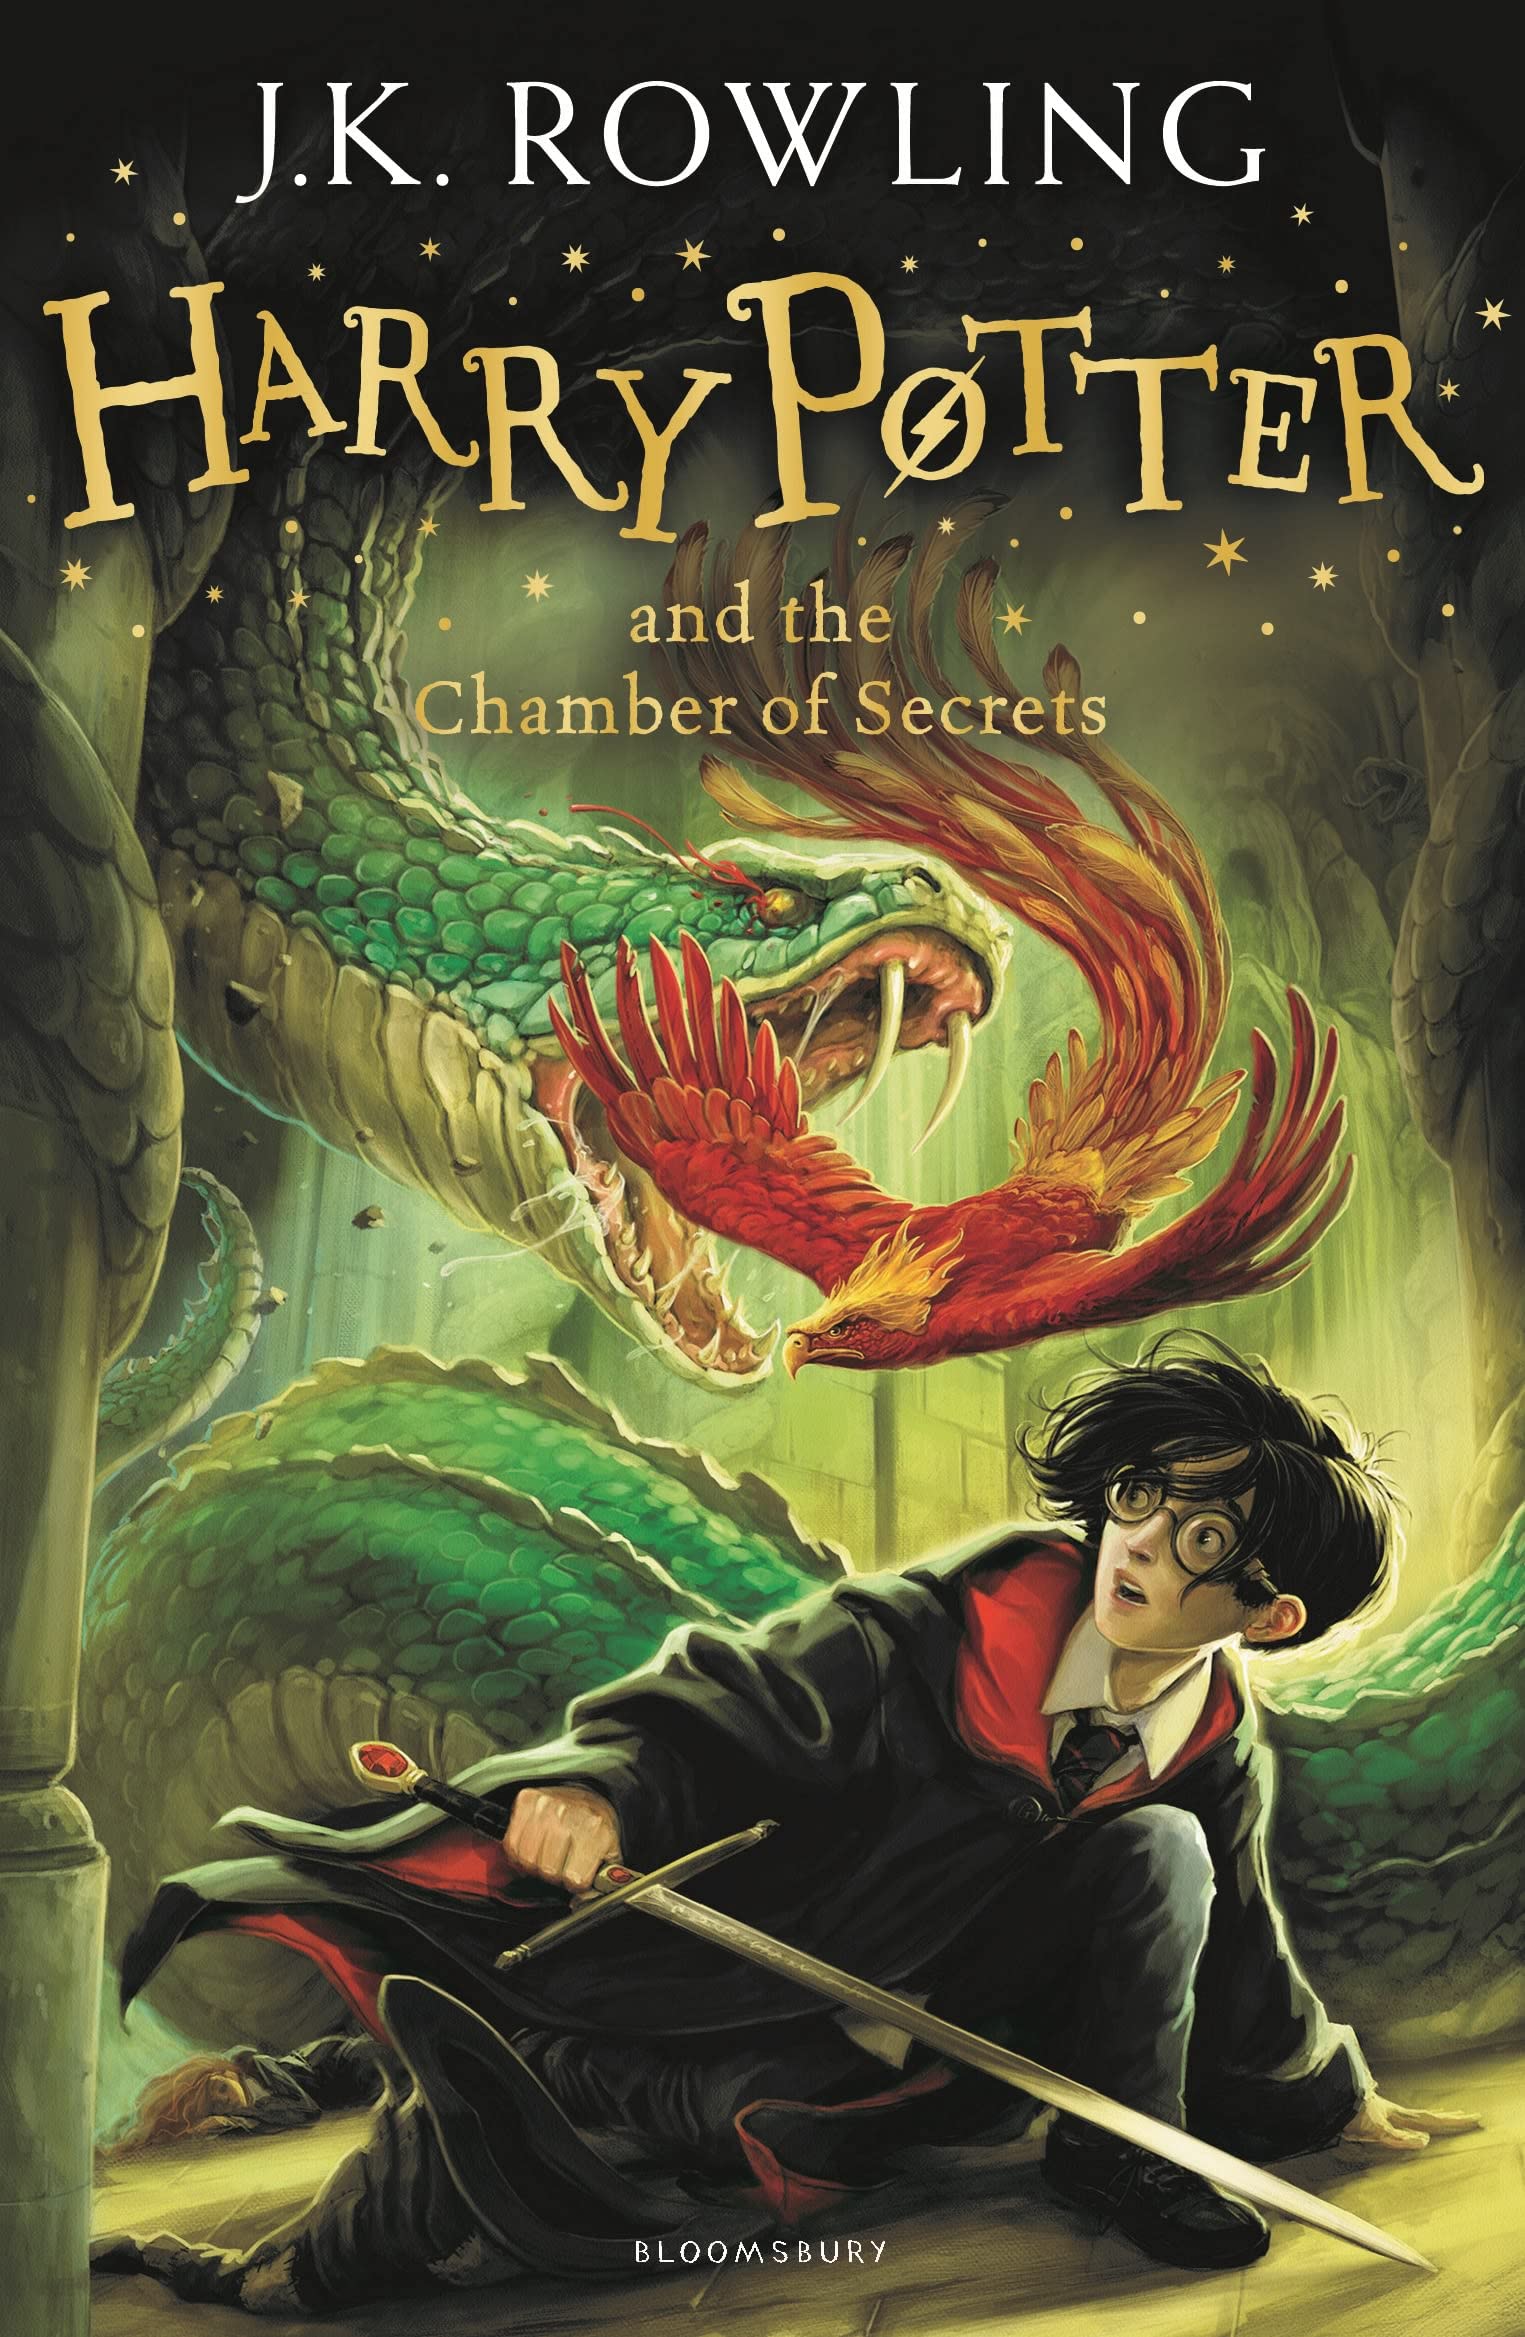 Rowling J.K. - Harry Potter and the Chamber of Secrets HC